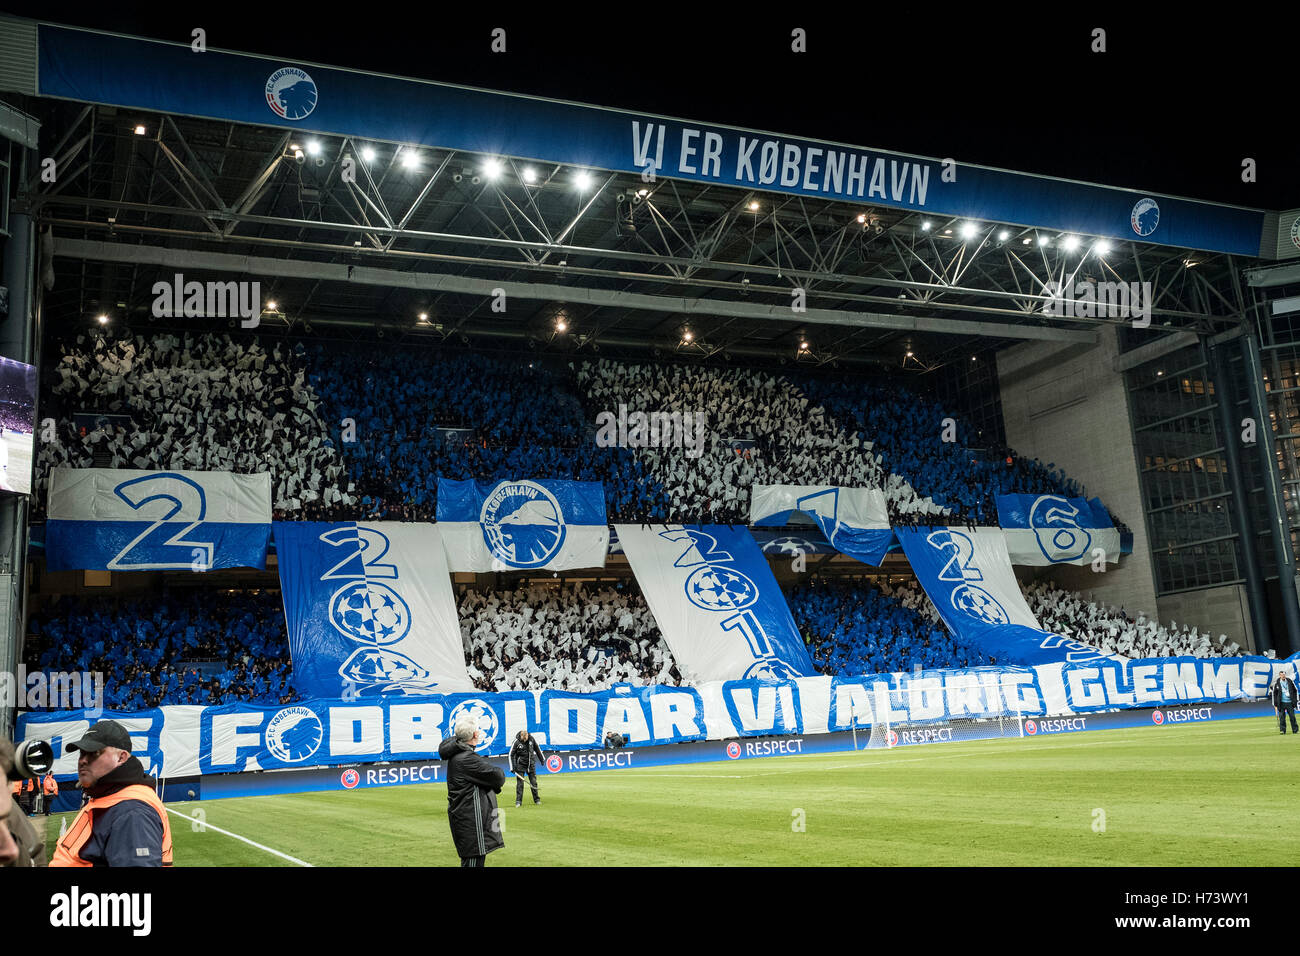 Denmark, Copenhagen, November 2nd 2016. The FC Copenhagen fans welcome the local heroes with a giant tifo during the UEFA Champions League’s Group G match between FC Copenhagen and Leicester City at Telia Parken. Stock Photo